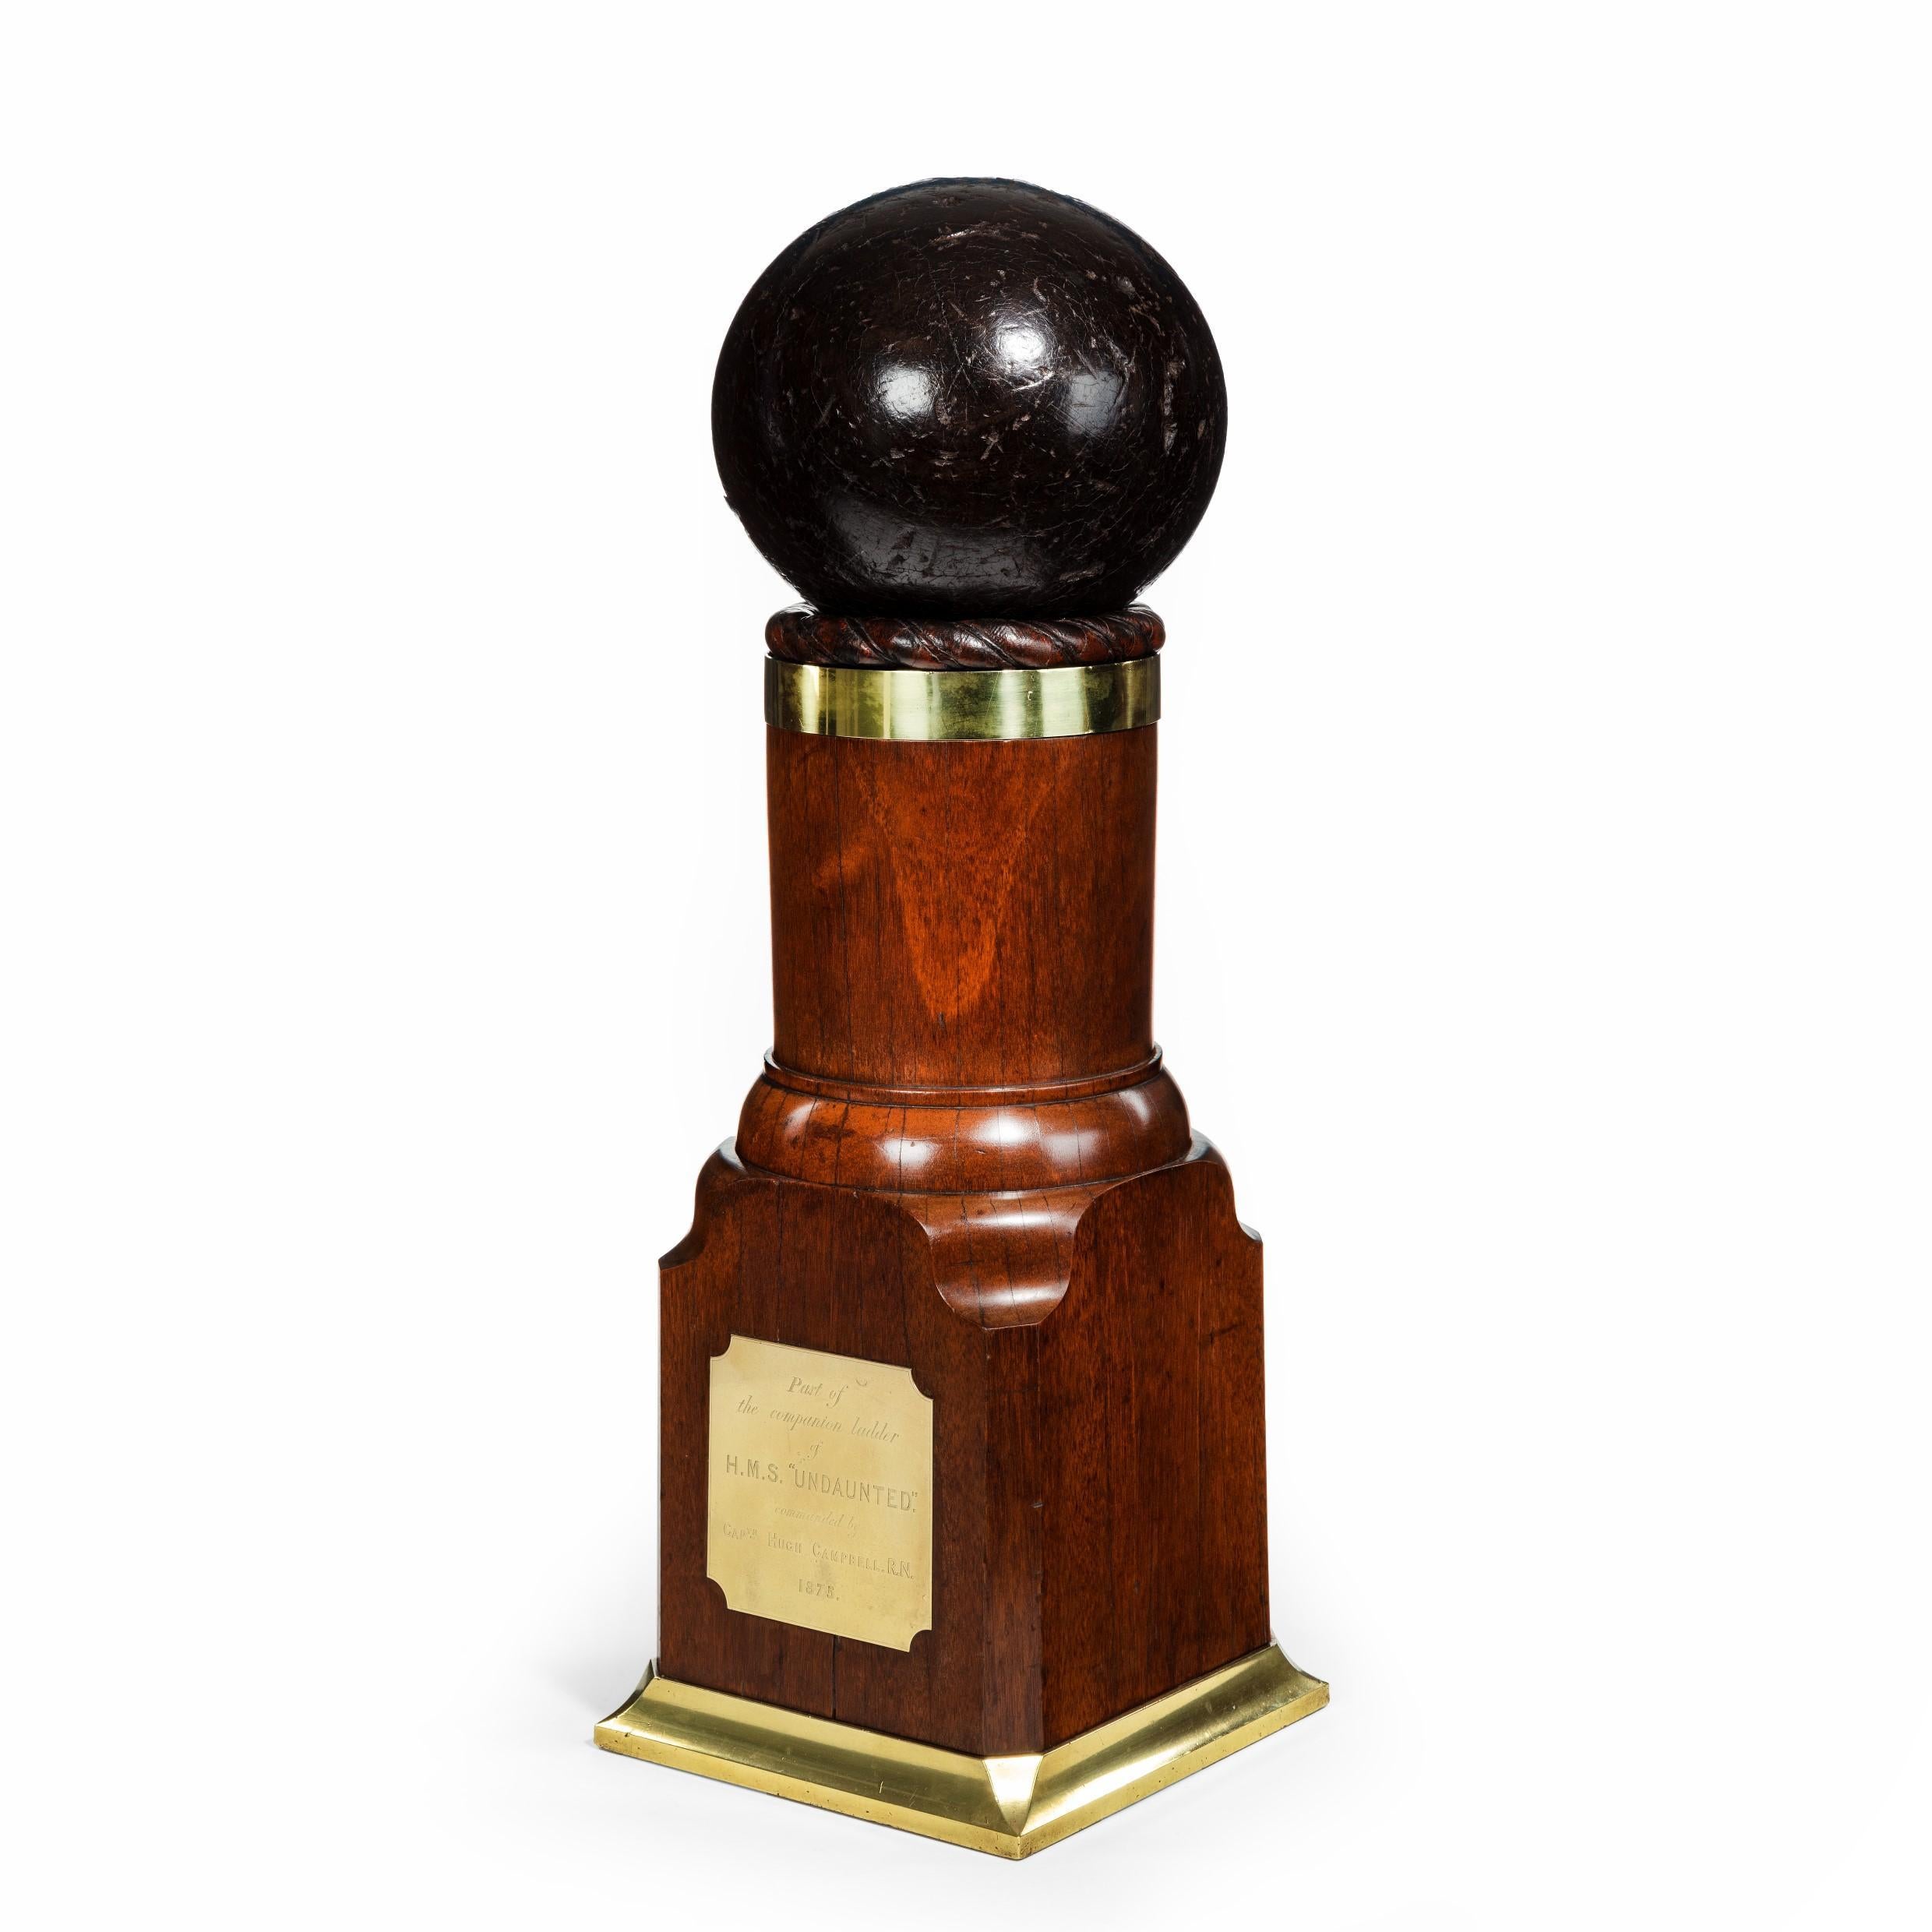 A H.M.S. Undaunted presentation souvenir for Captain Hugh Campbell RN, 1875, comprising part of a ladder post with a square section base and truncated cylindrical shaft capped with a rope-twist collar supporting a wooden ‘dummy’ cannon ball, with a